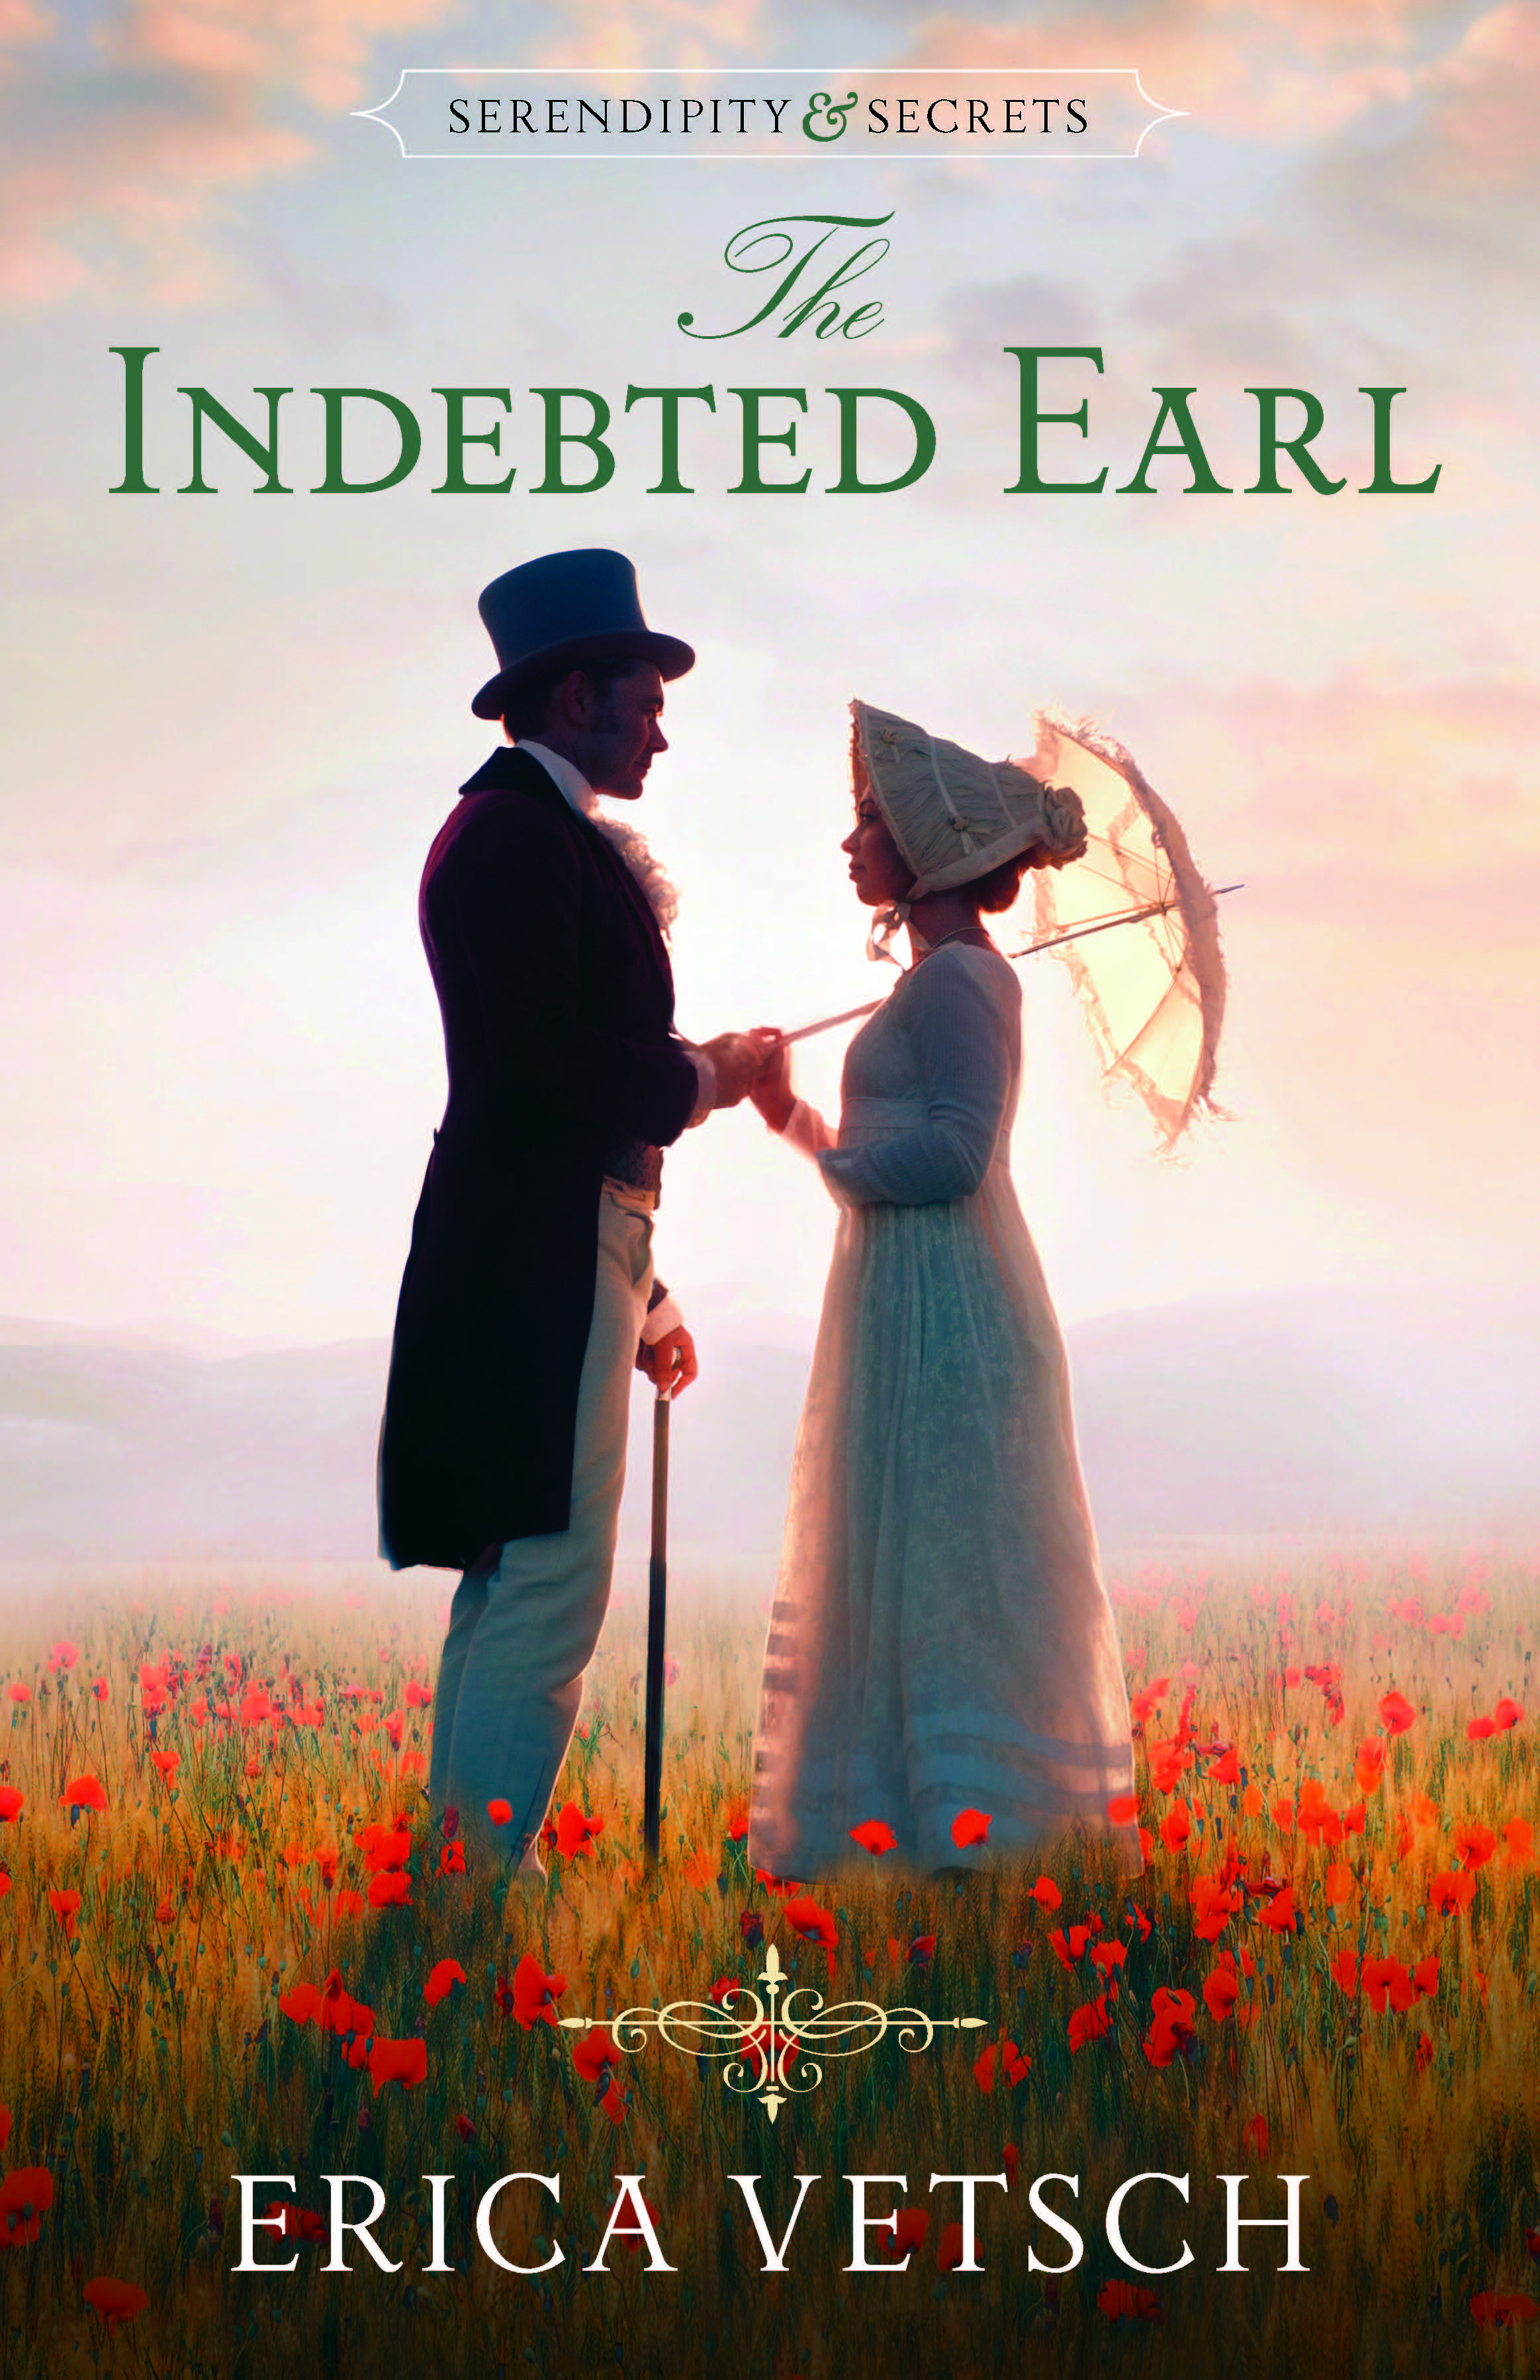 The Indebted Earl